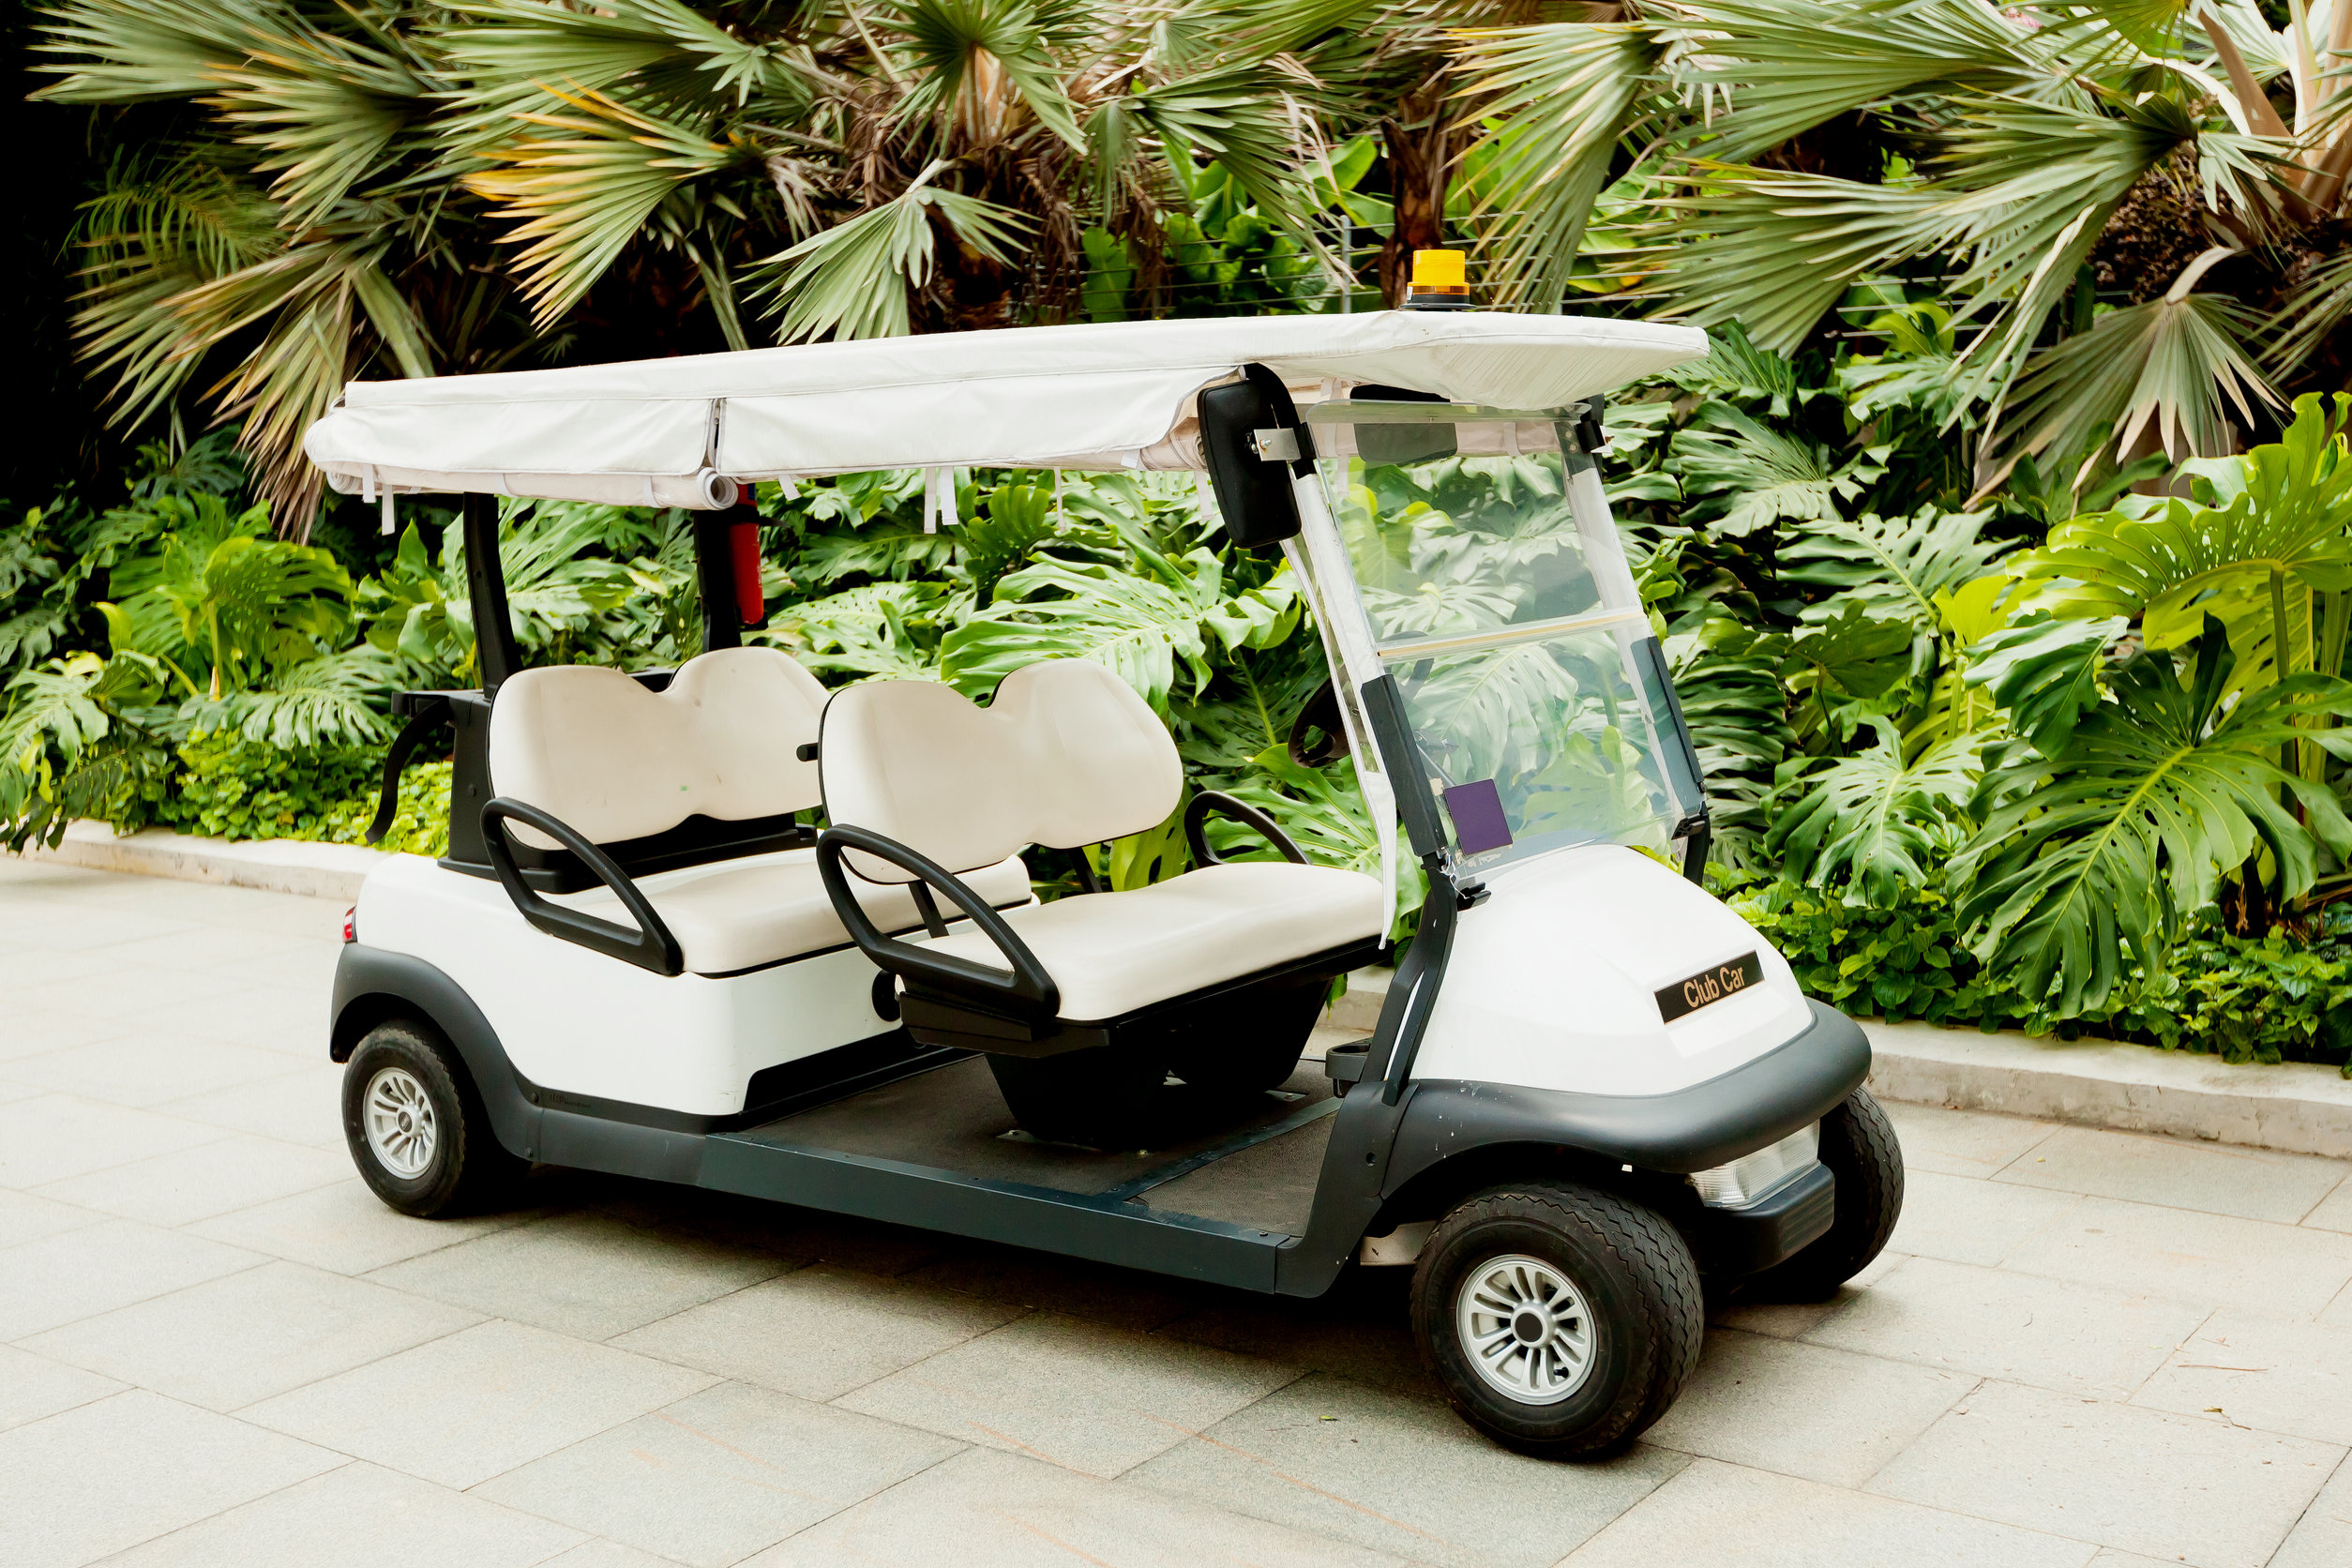 4 Seat Golf Cart - Make Room for Passengers or for Hauling Stuff